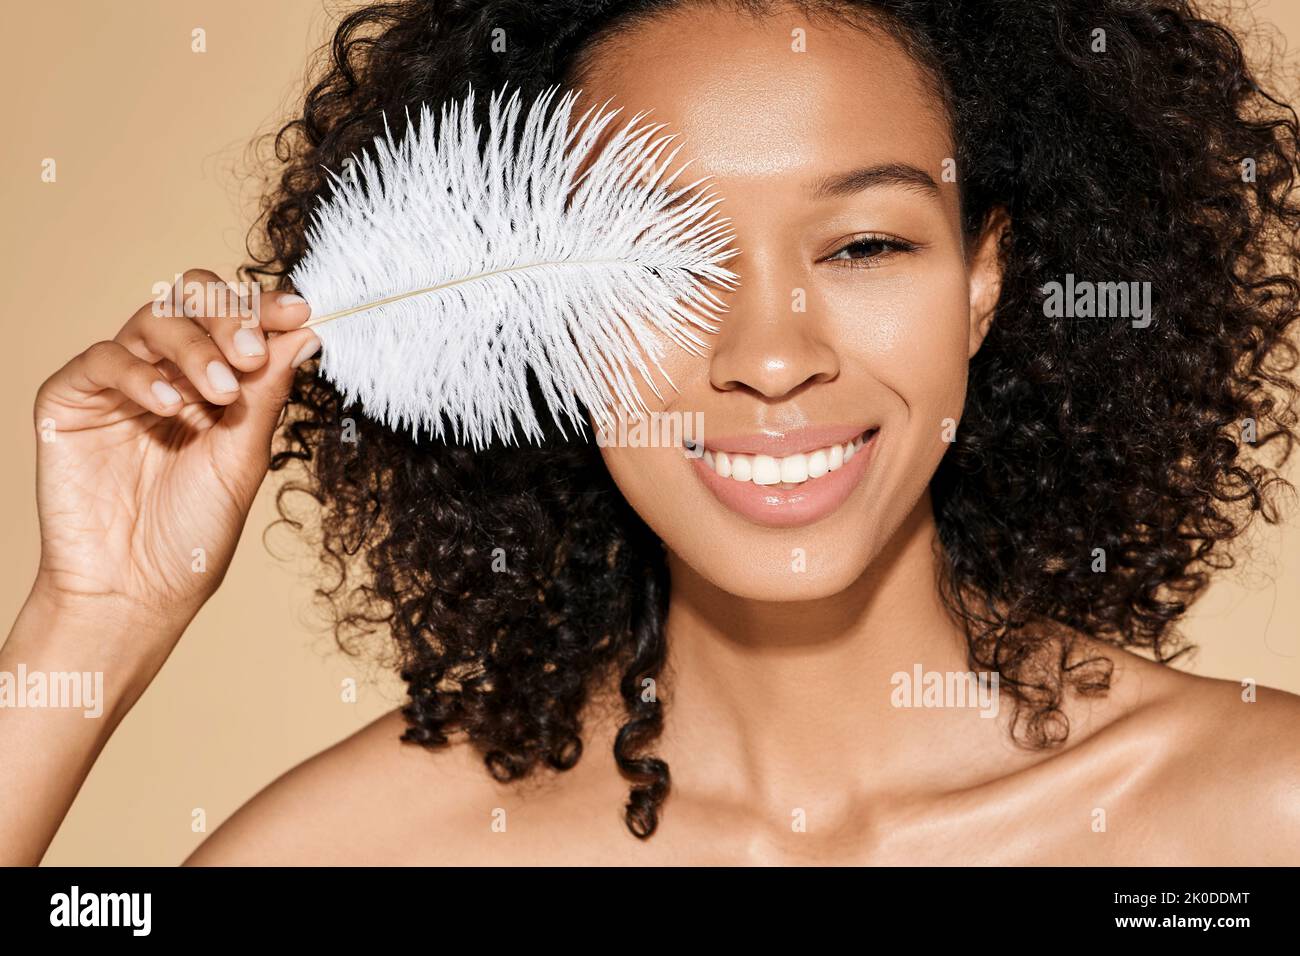 African woman showing how smooth and soft her skin is by touching her face with white feather on beige background. Facial skin care Stock Photo